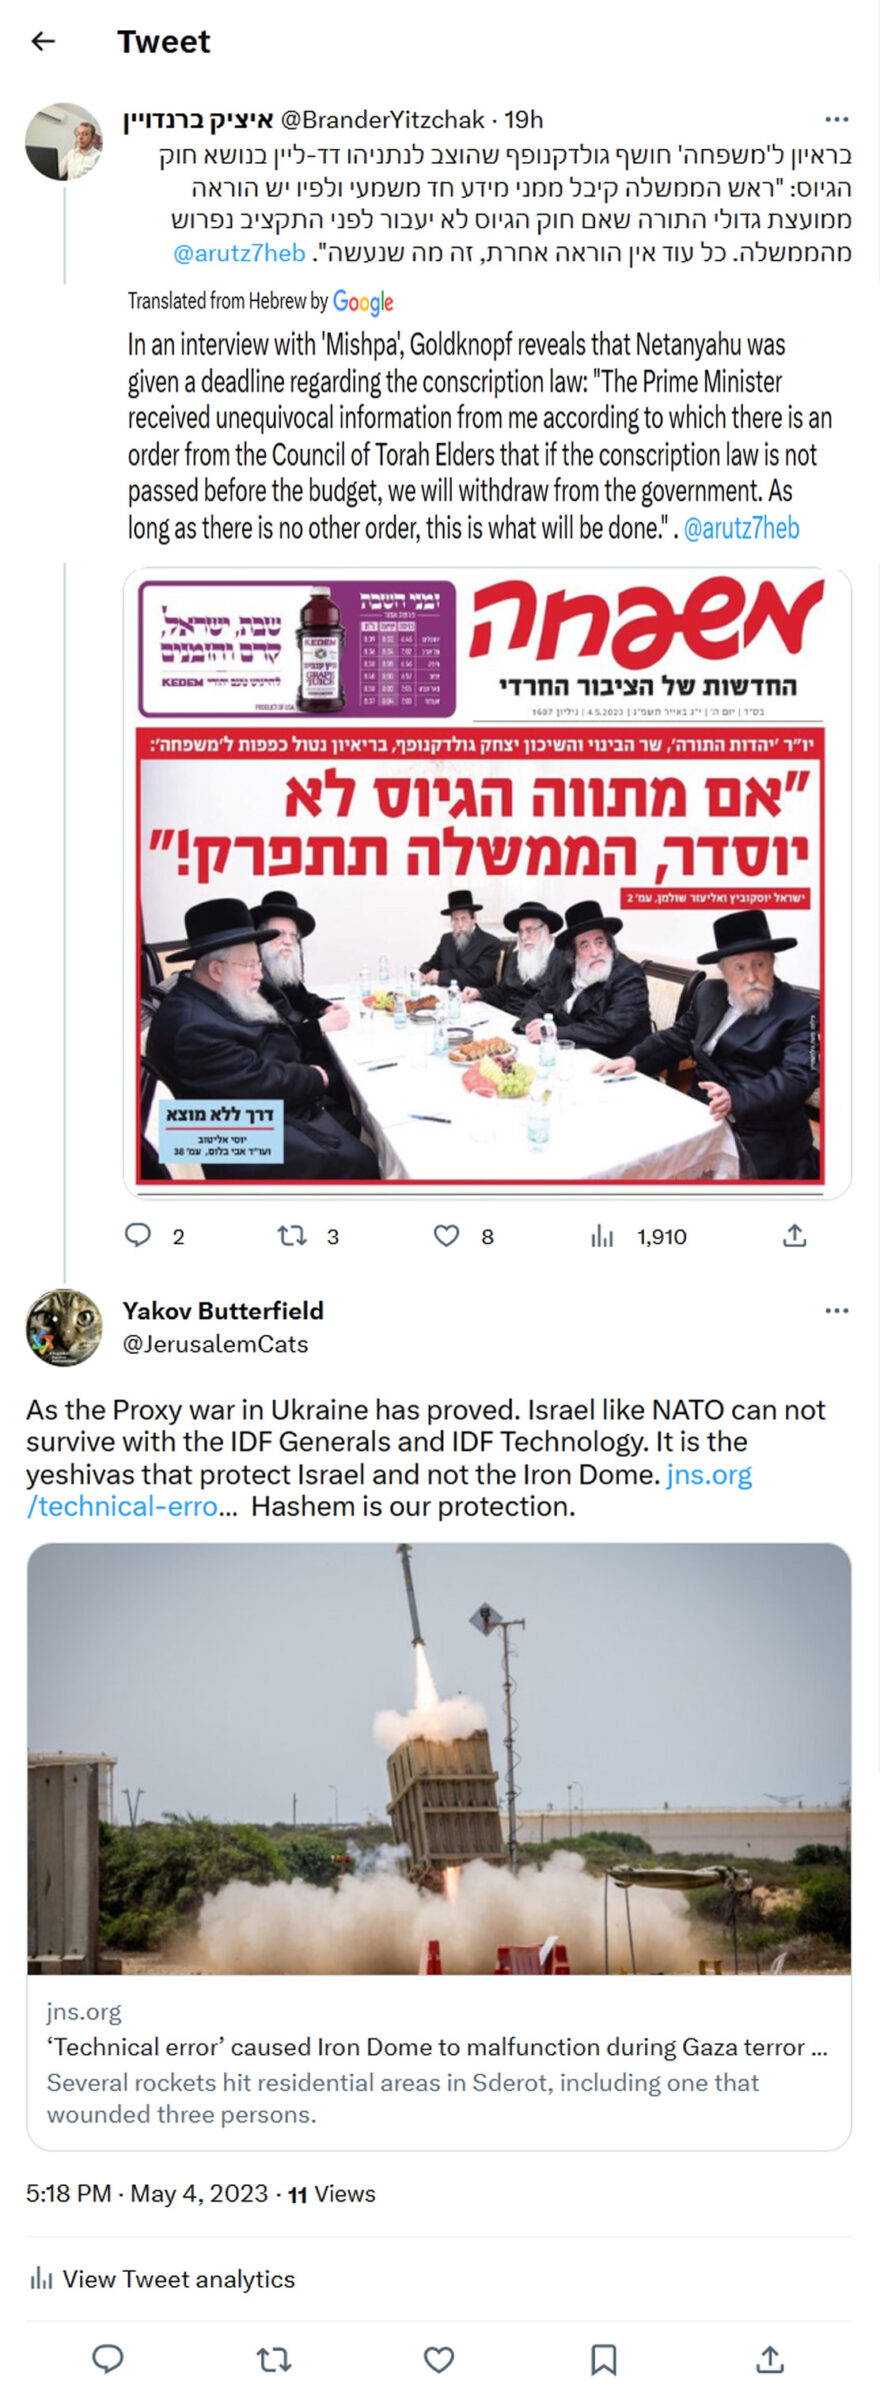 JerusalemCats-tweet-4May2023-Israel like NATO can not survive with the IDF Generals and IDF Technology